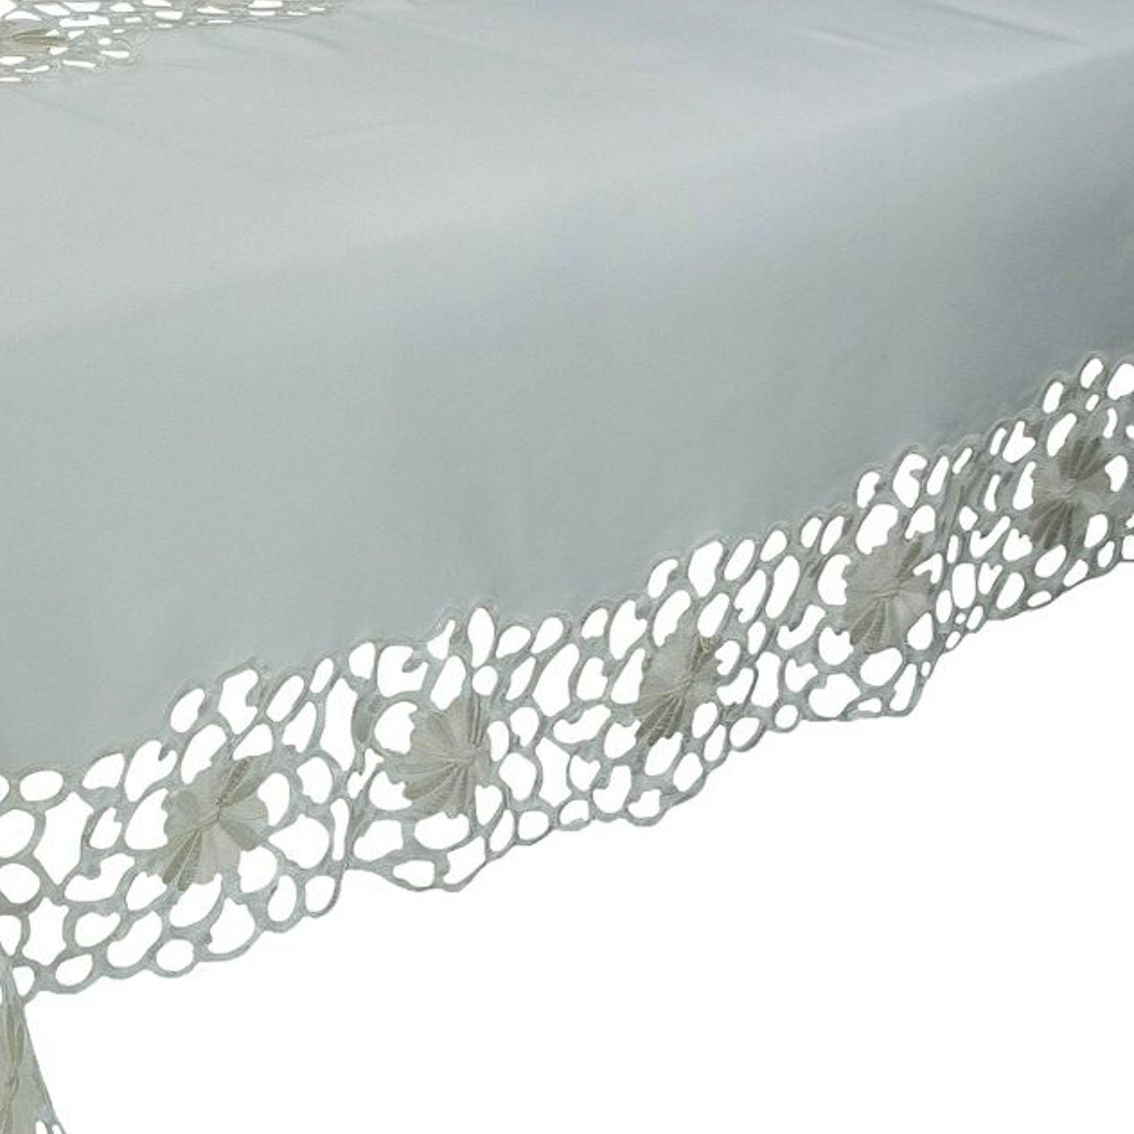 Xia Home Fashions,  Daisy Splendor Tablecloth, 70-Inch By 108-Inch, Ivory - Image 2 of 2